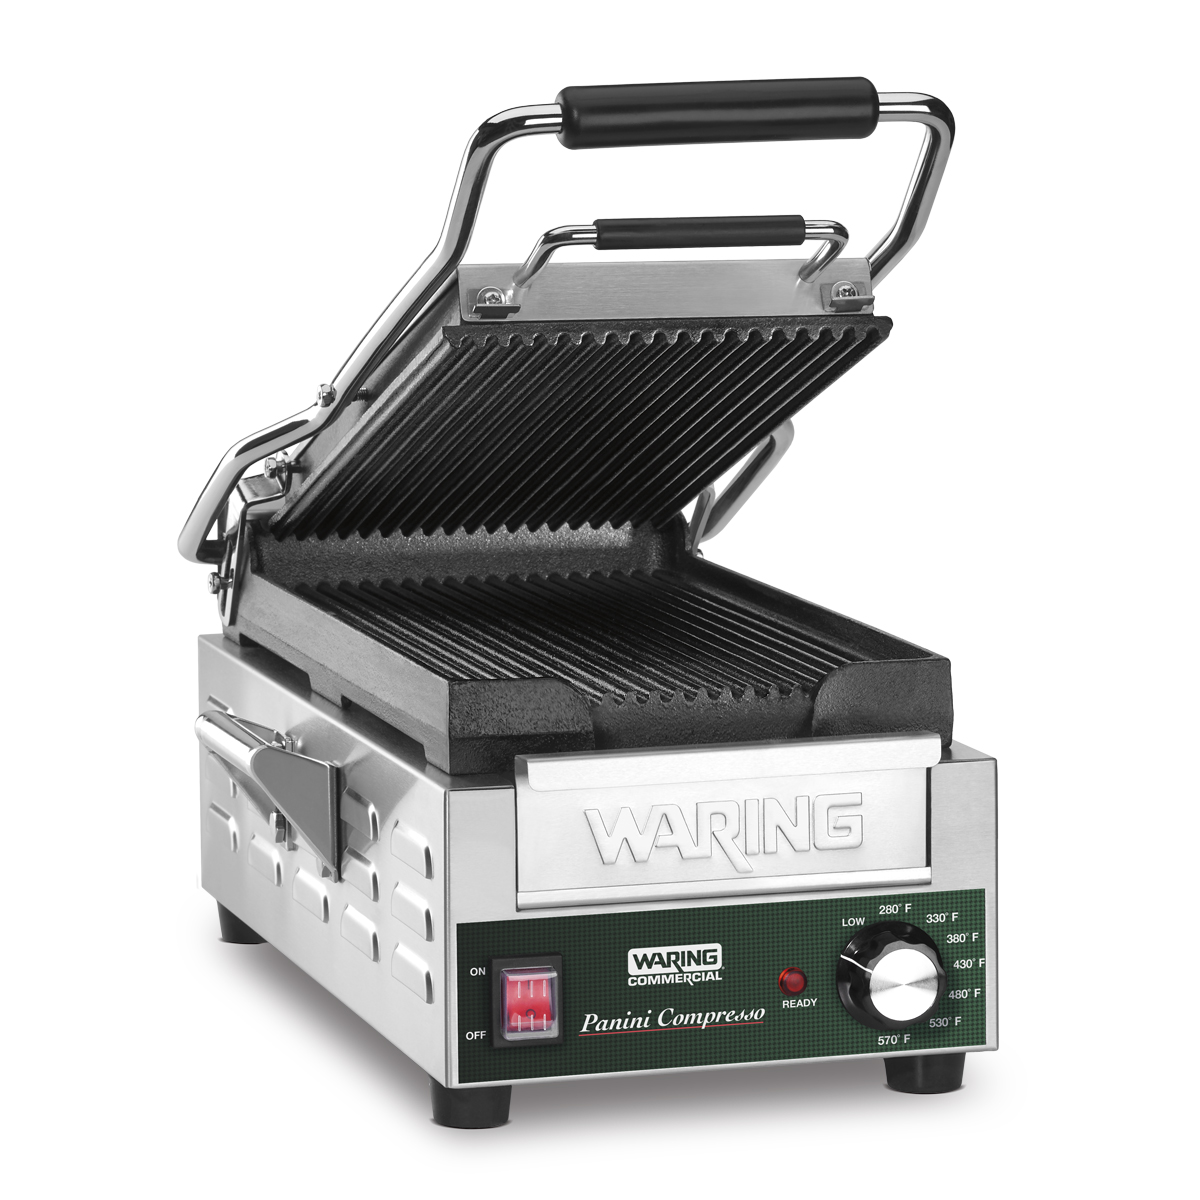 https://www.waringcommercialproducts.com/files/products/wpg200-waring-panini-compresso-slimline-panini-grill-main-image-1200x1200.jpg